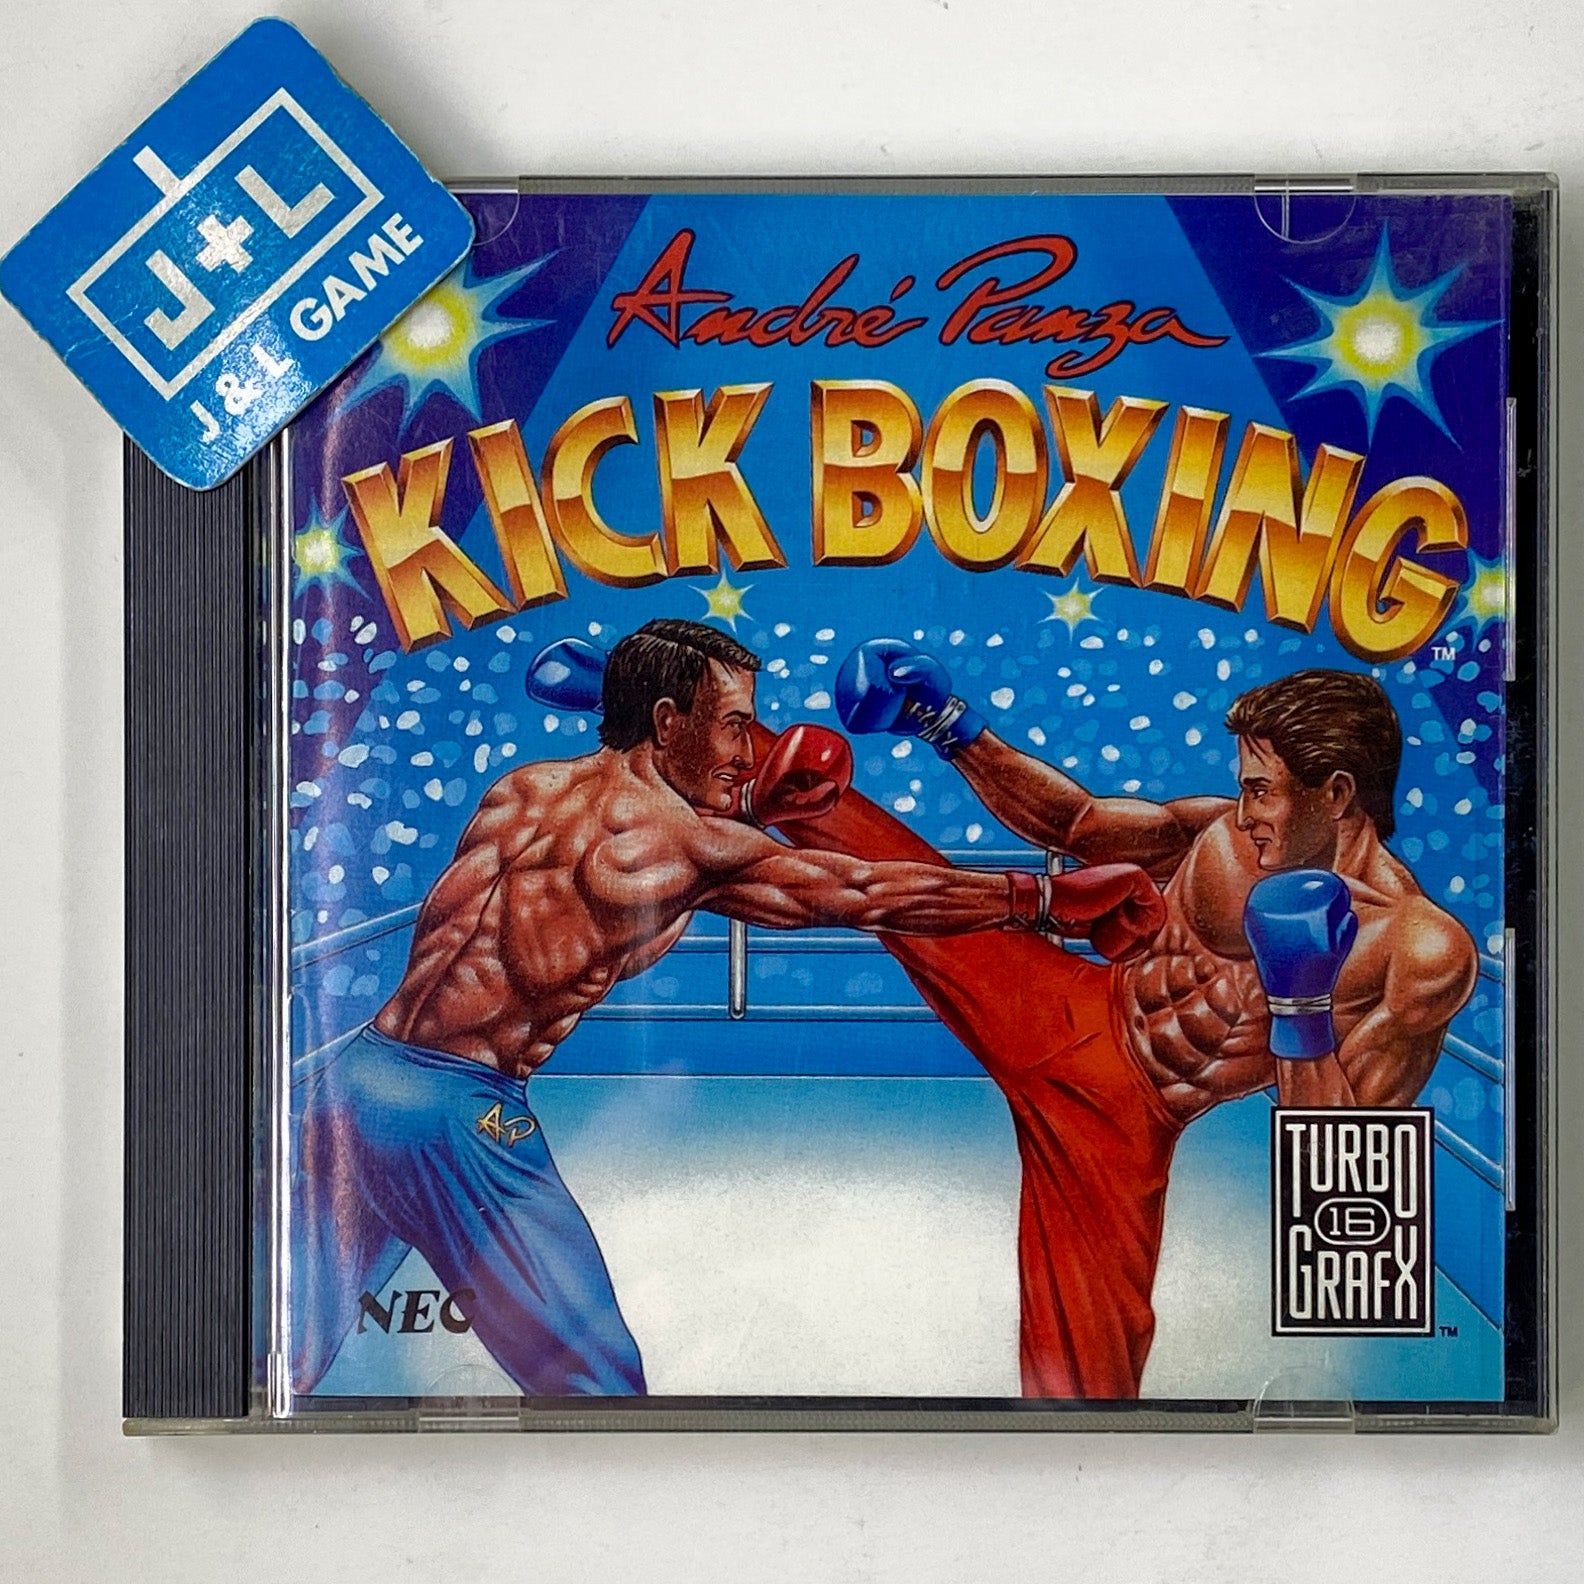 Andre Panza Kick Boxing - TurboGrafx-16 [Pre-Owned] Video Games Turbo Technologies, Inc.   